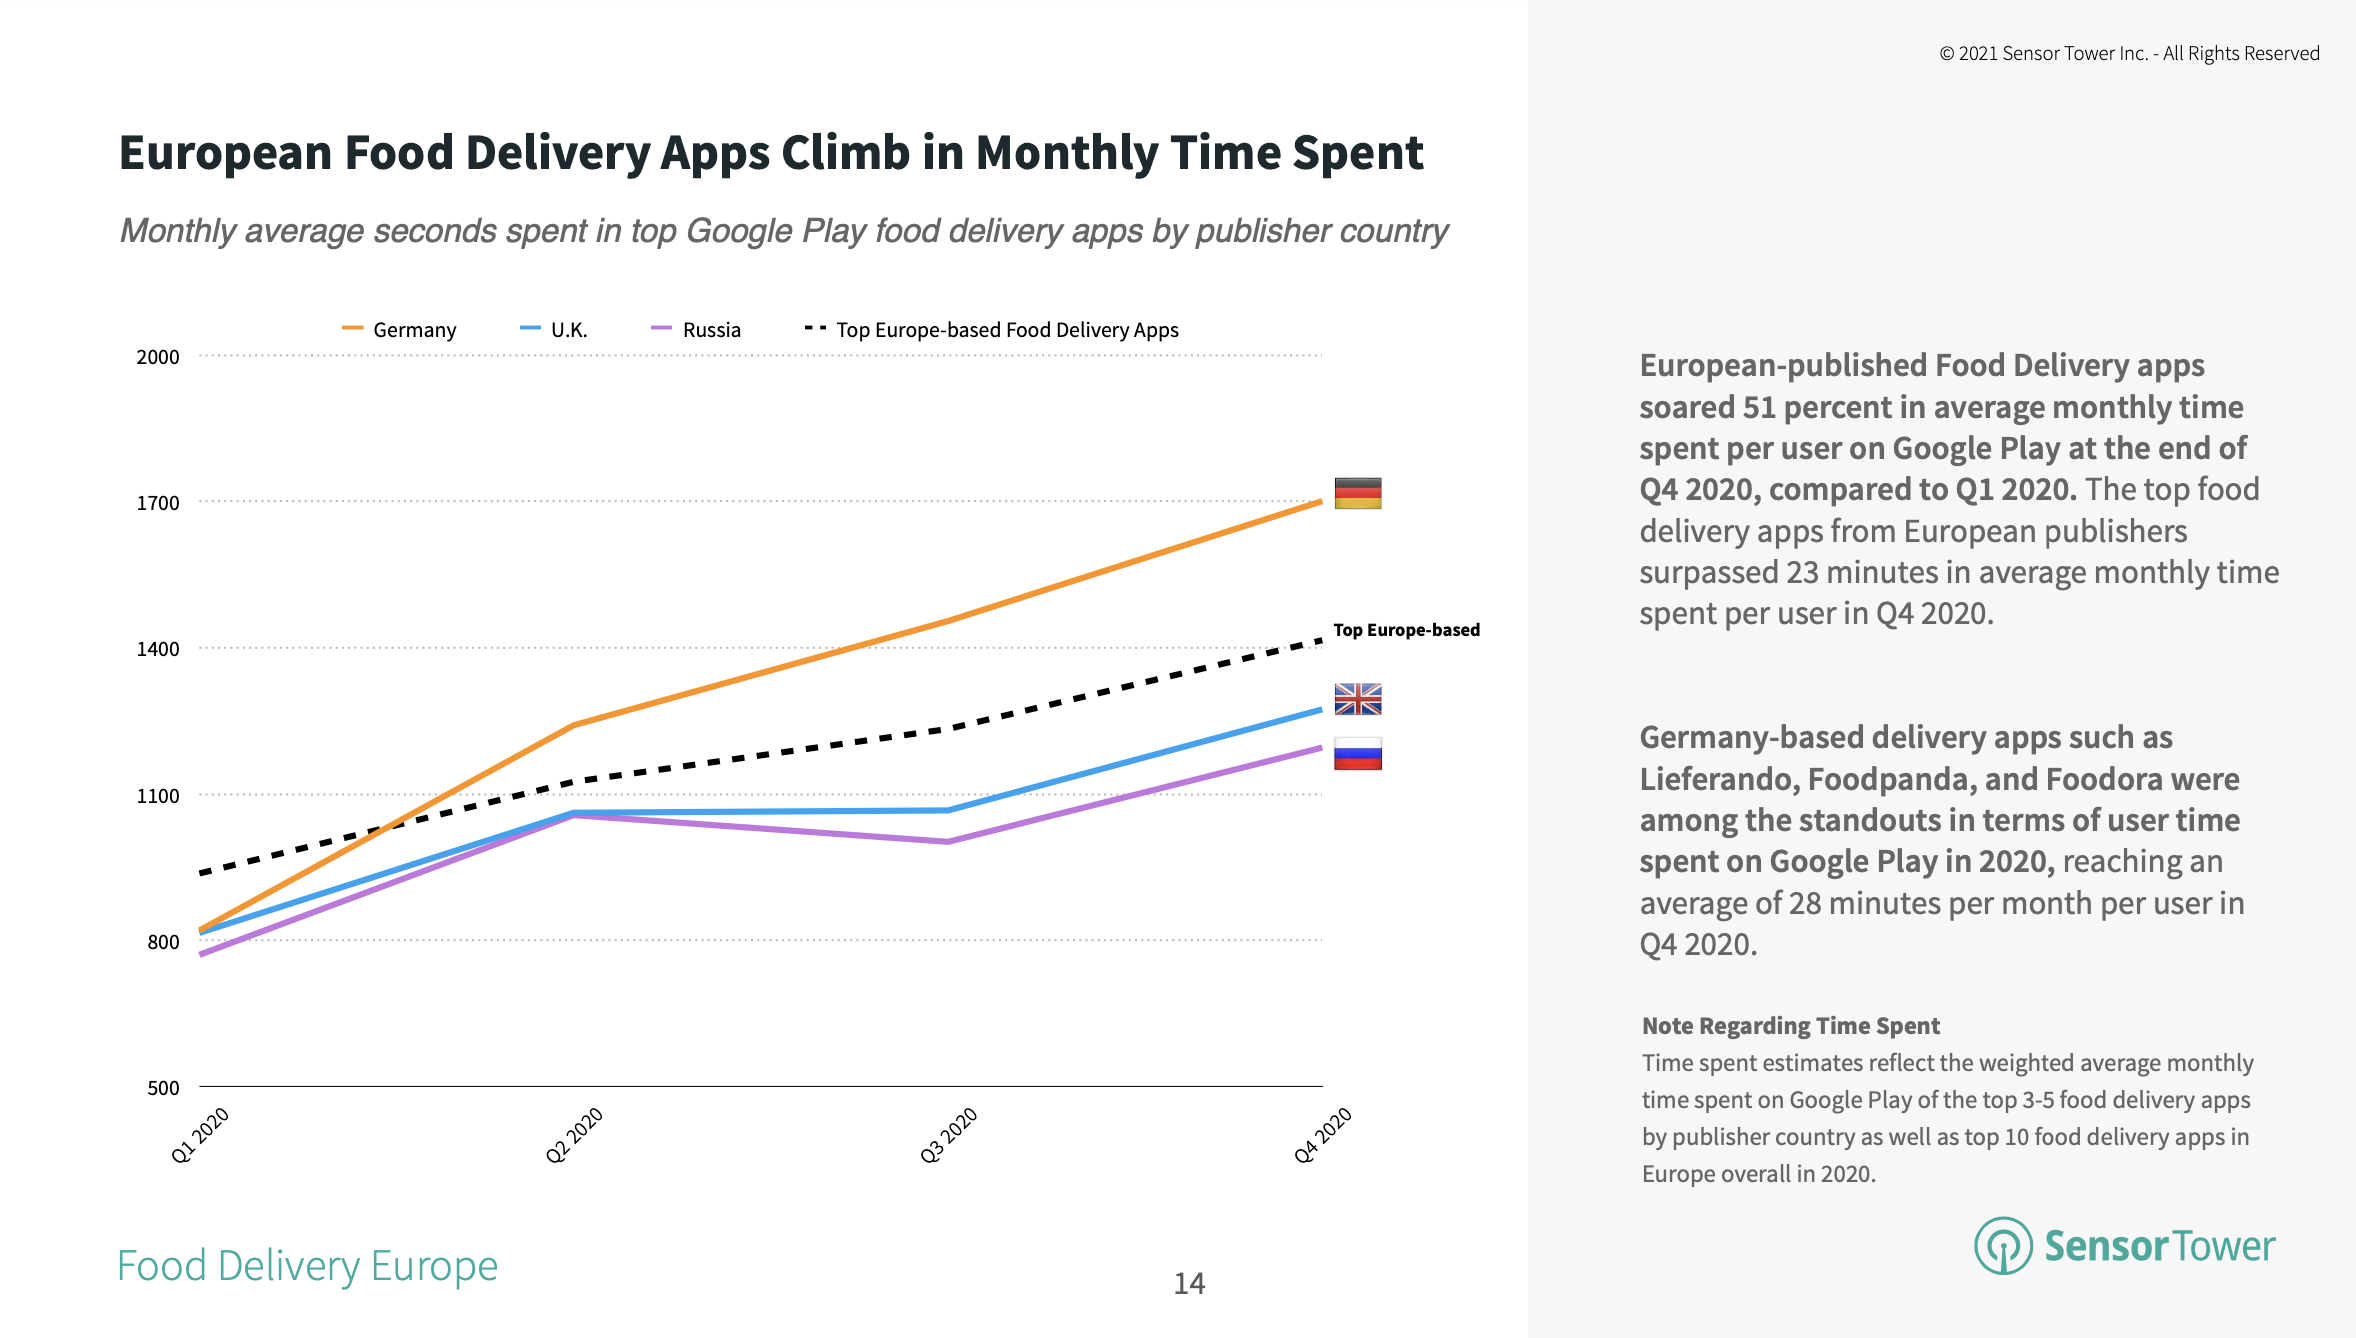 The top food delivery apps in Europe surpassed 1,400 seconds in monthly time spent in Q4 2020.